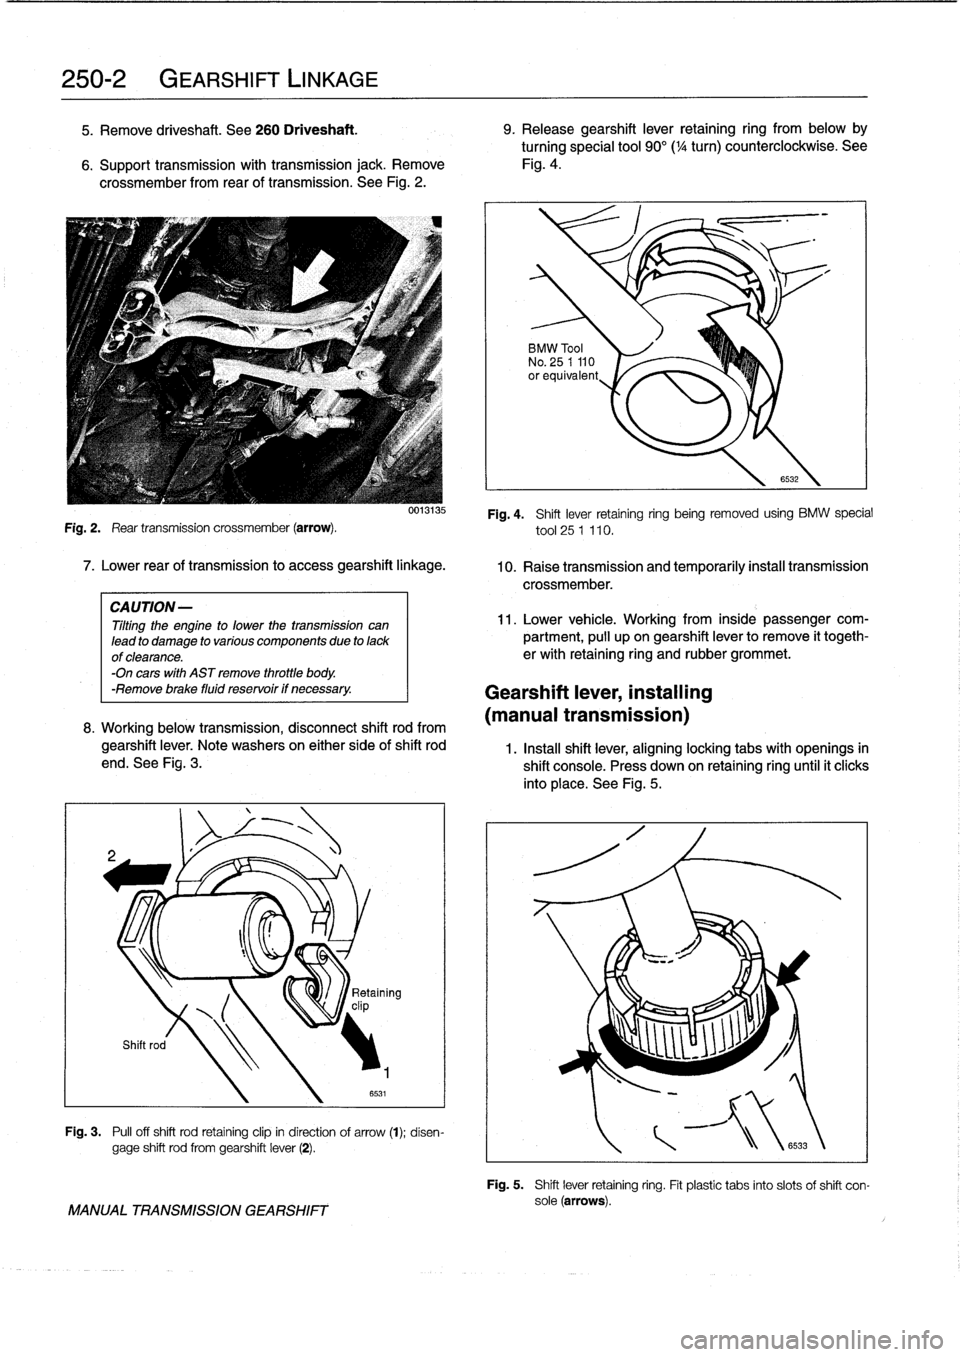 BMW 328i 1997 E36 Owners Manual 
250-2

	

GEARSHIFT
LINKAGE

5
.
Remove
driveshaft
.
See260
Driveshaft
.

	

9
.
Release
gearshift
lever
retaining
ring
from
below
by

turningspecial
tool
90°(
1
/4
turn)
counterclockwise
.
See

6
.